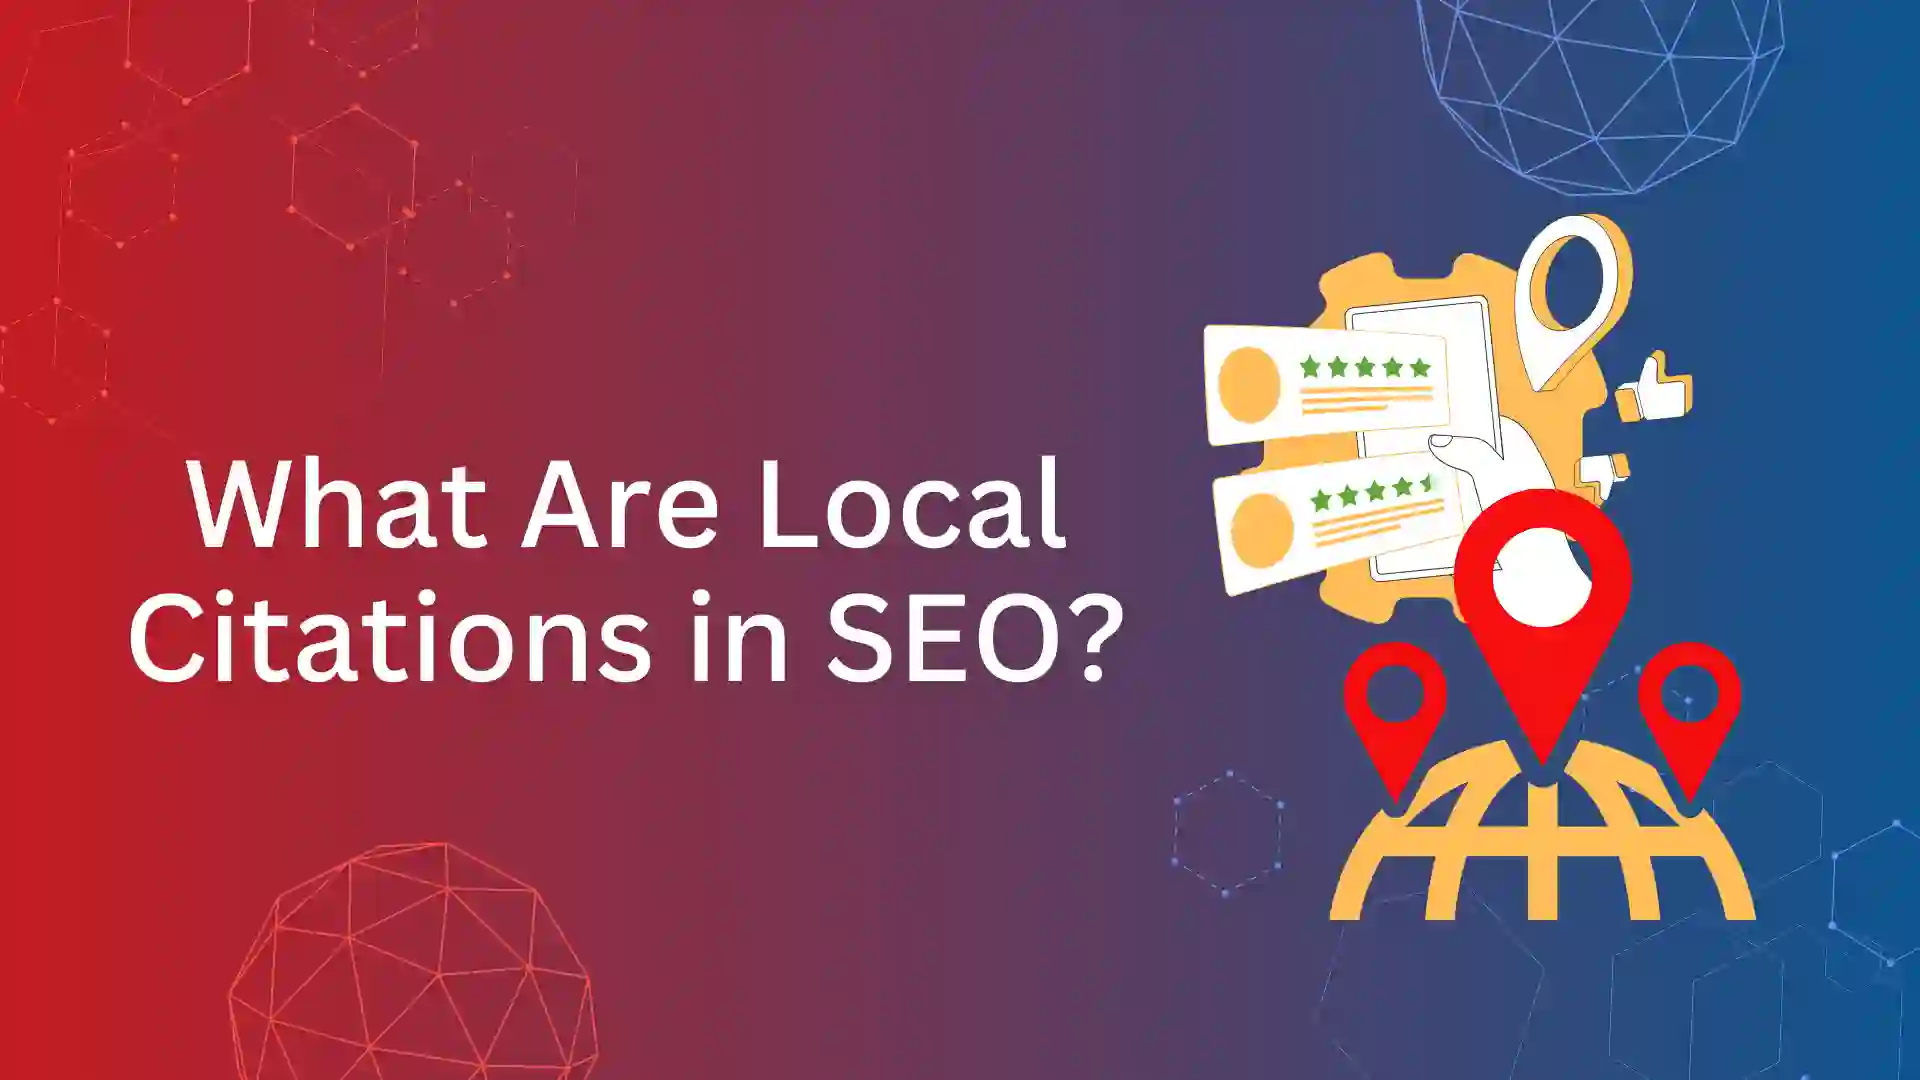 What Are Local Citations in SEO